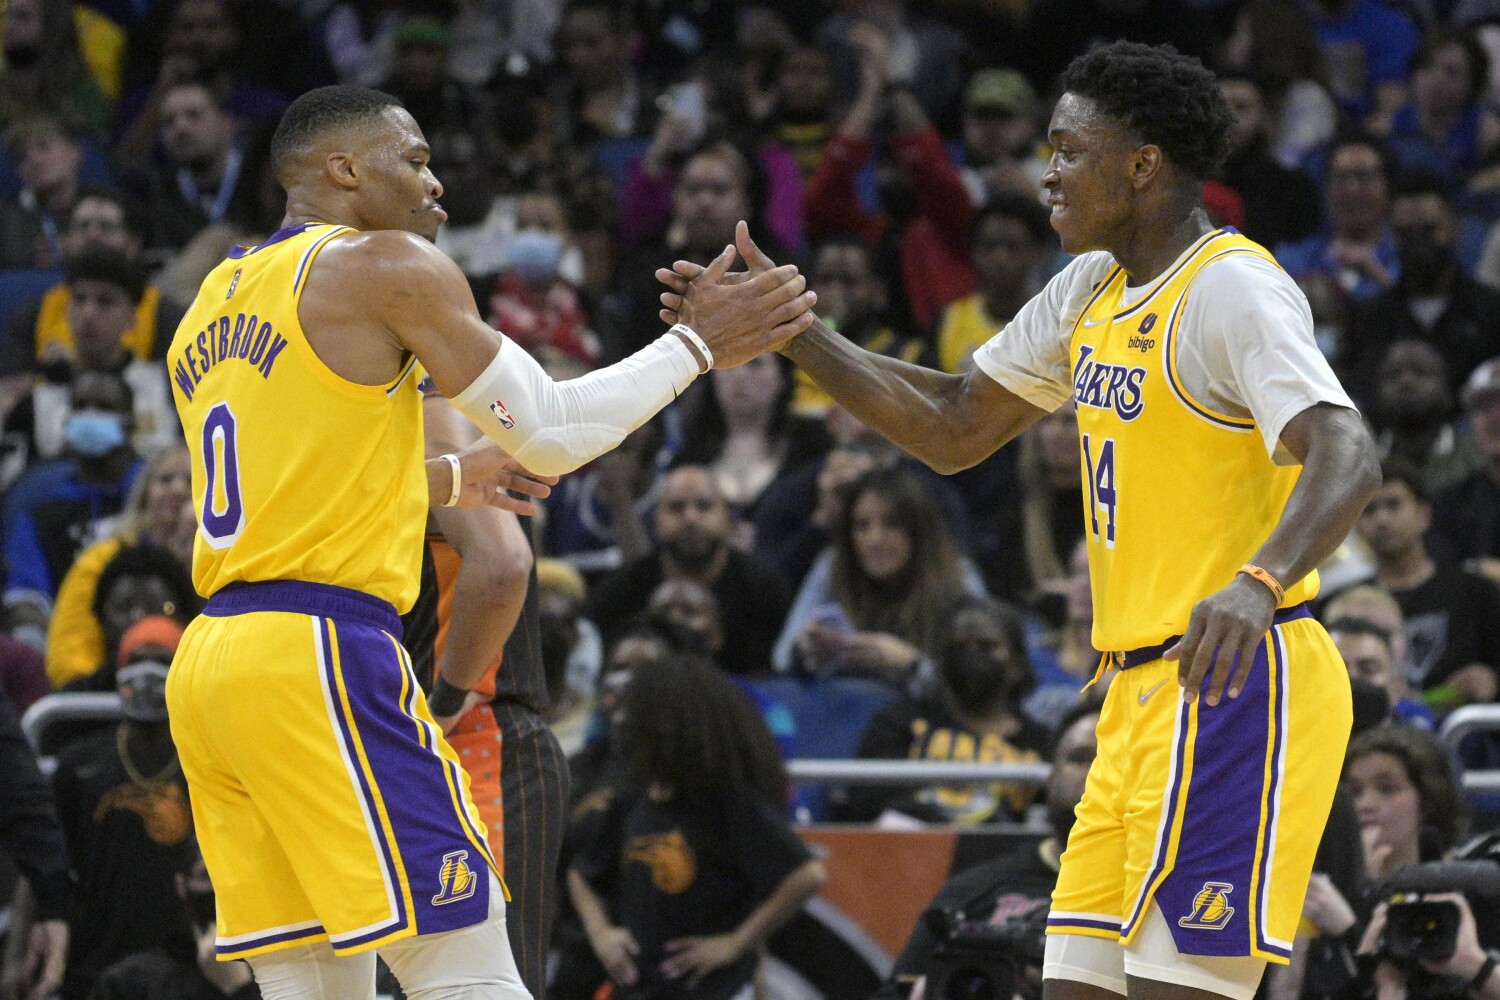 Lakers coach makes all the right moves to beat Magic in opener of road trip